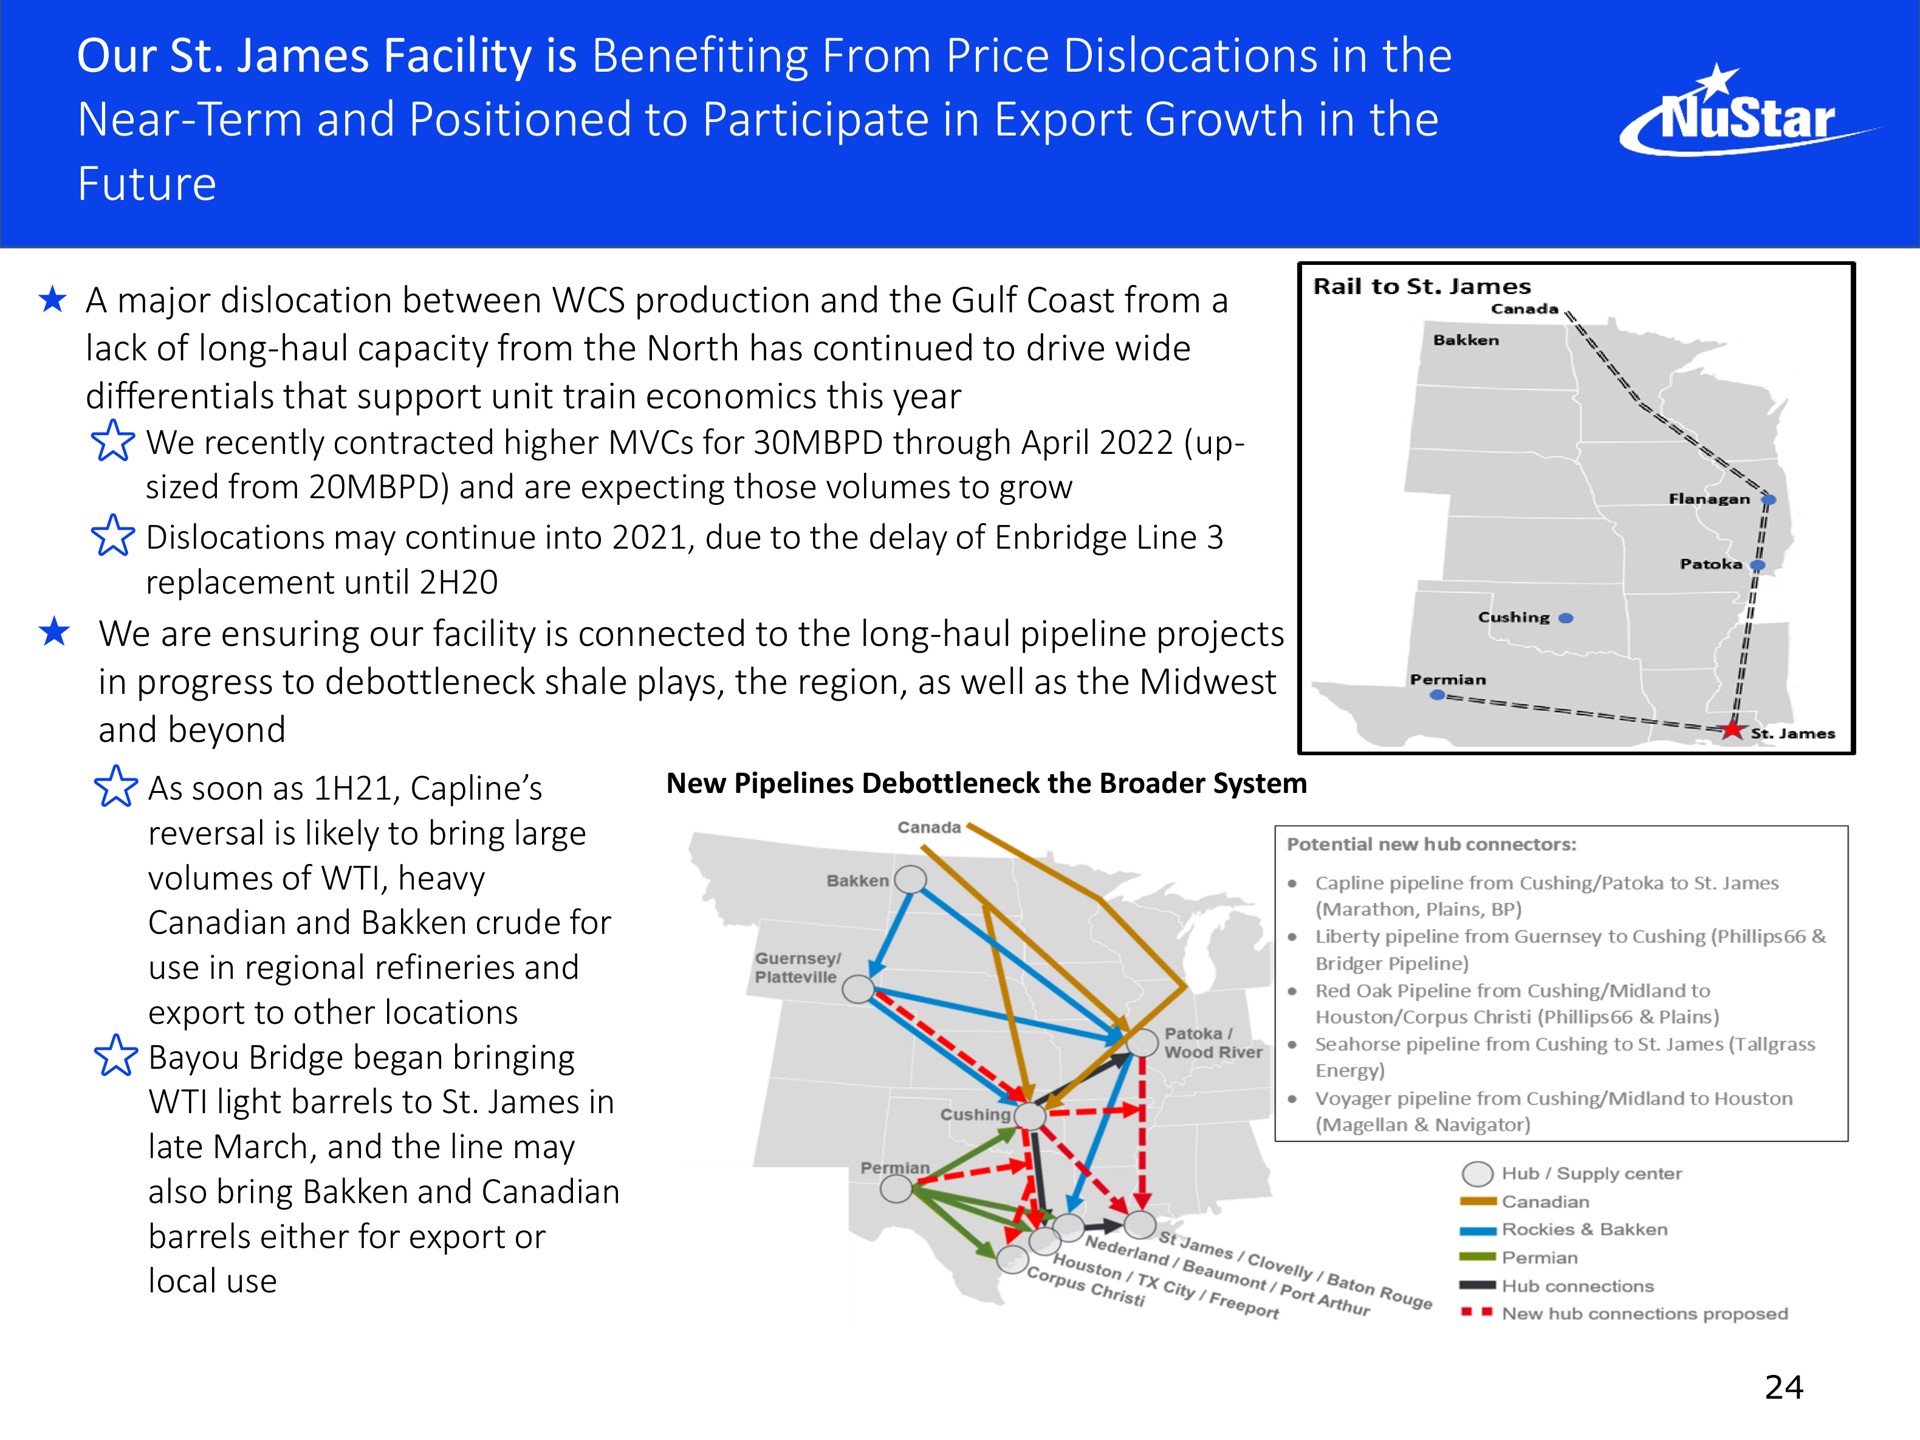 our james facility is benefiting from price dislocations in the near term and positioned to participate in export growth in the future | NuStar Energy